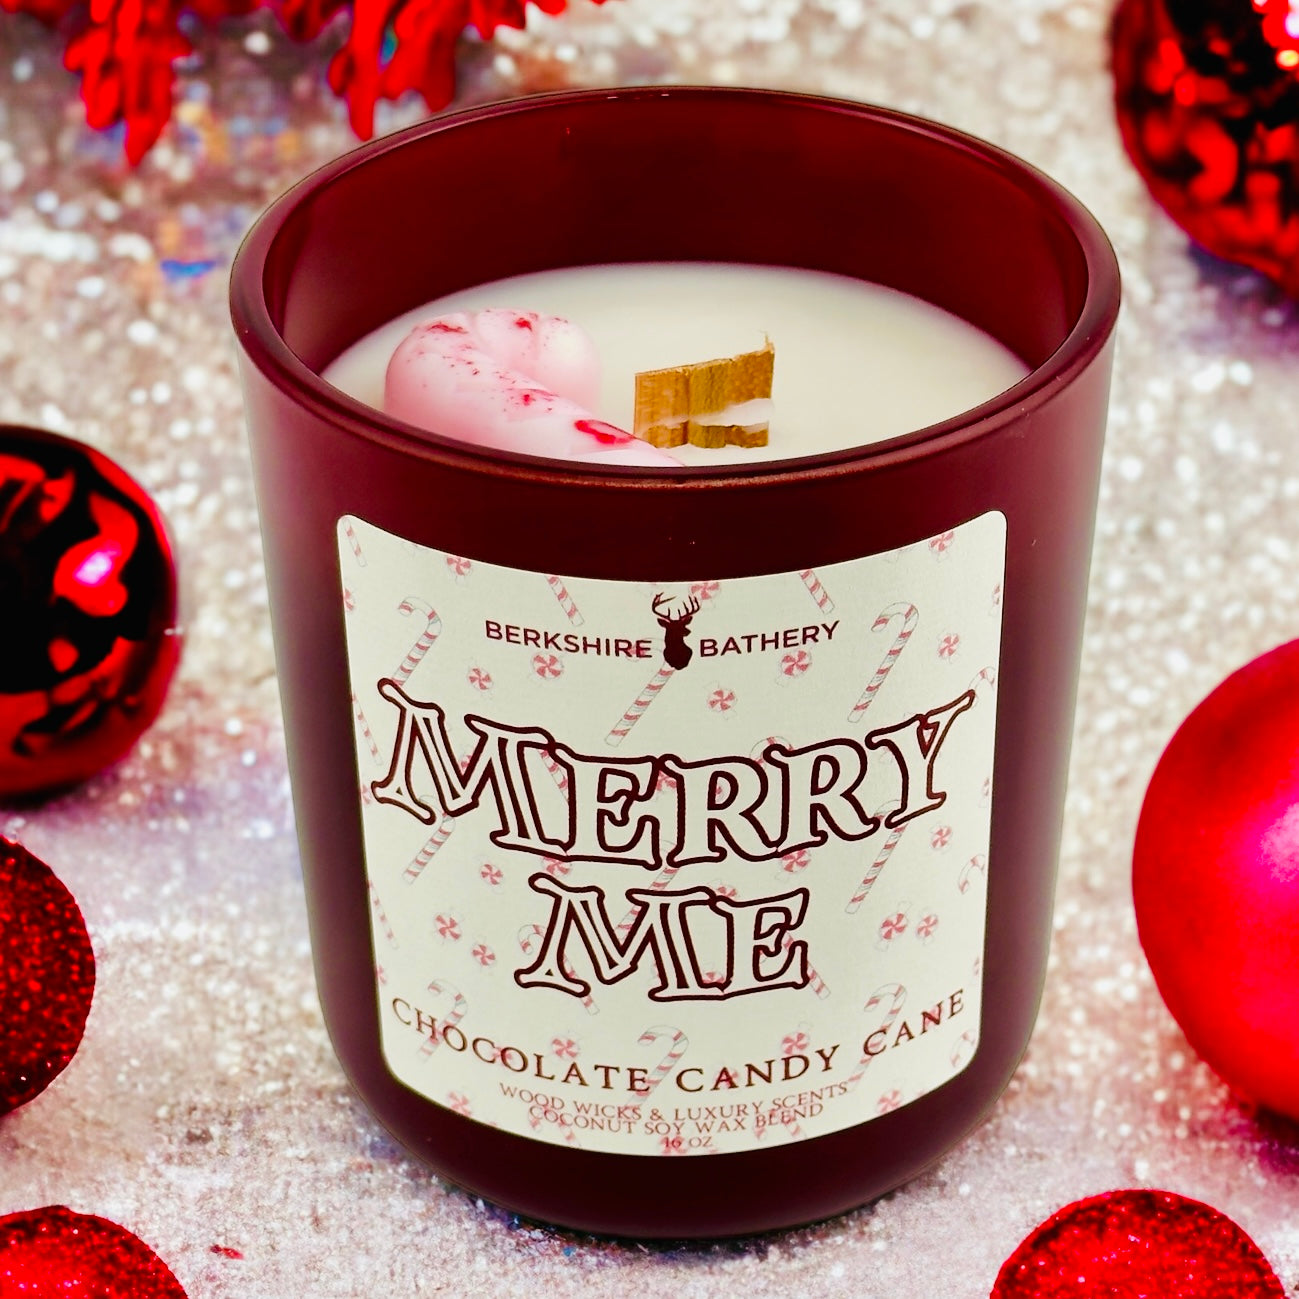 merry me Christmas pun candle crushed candy cane chocolate scented candle holiday wood wick